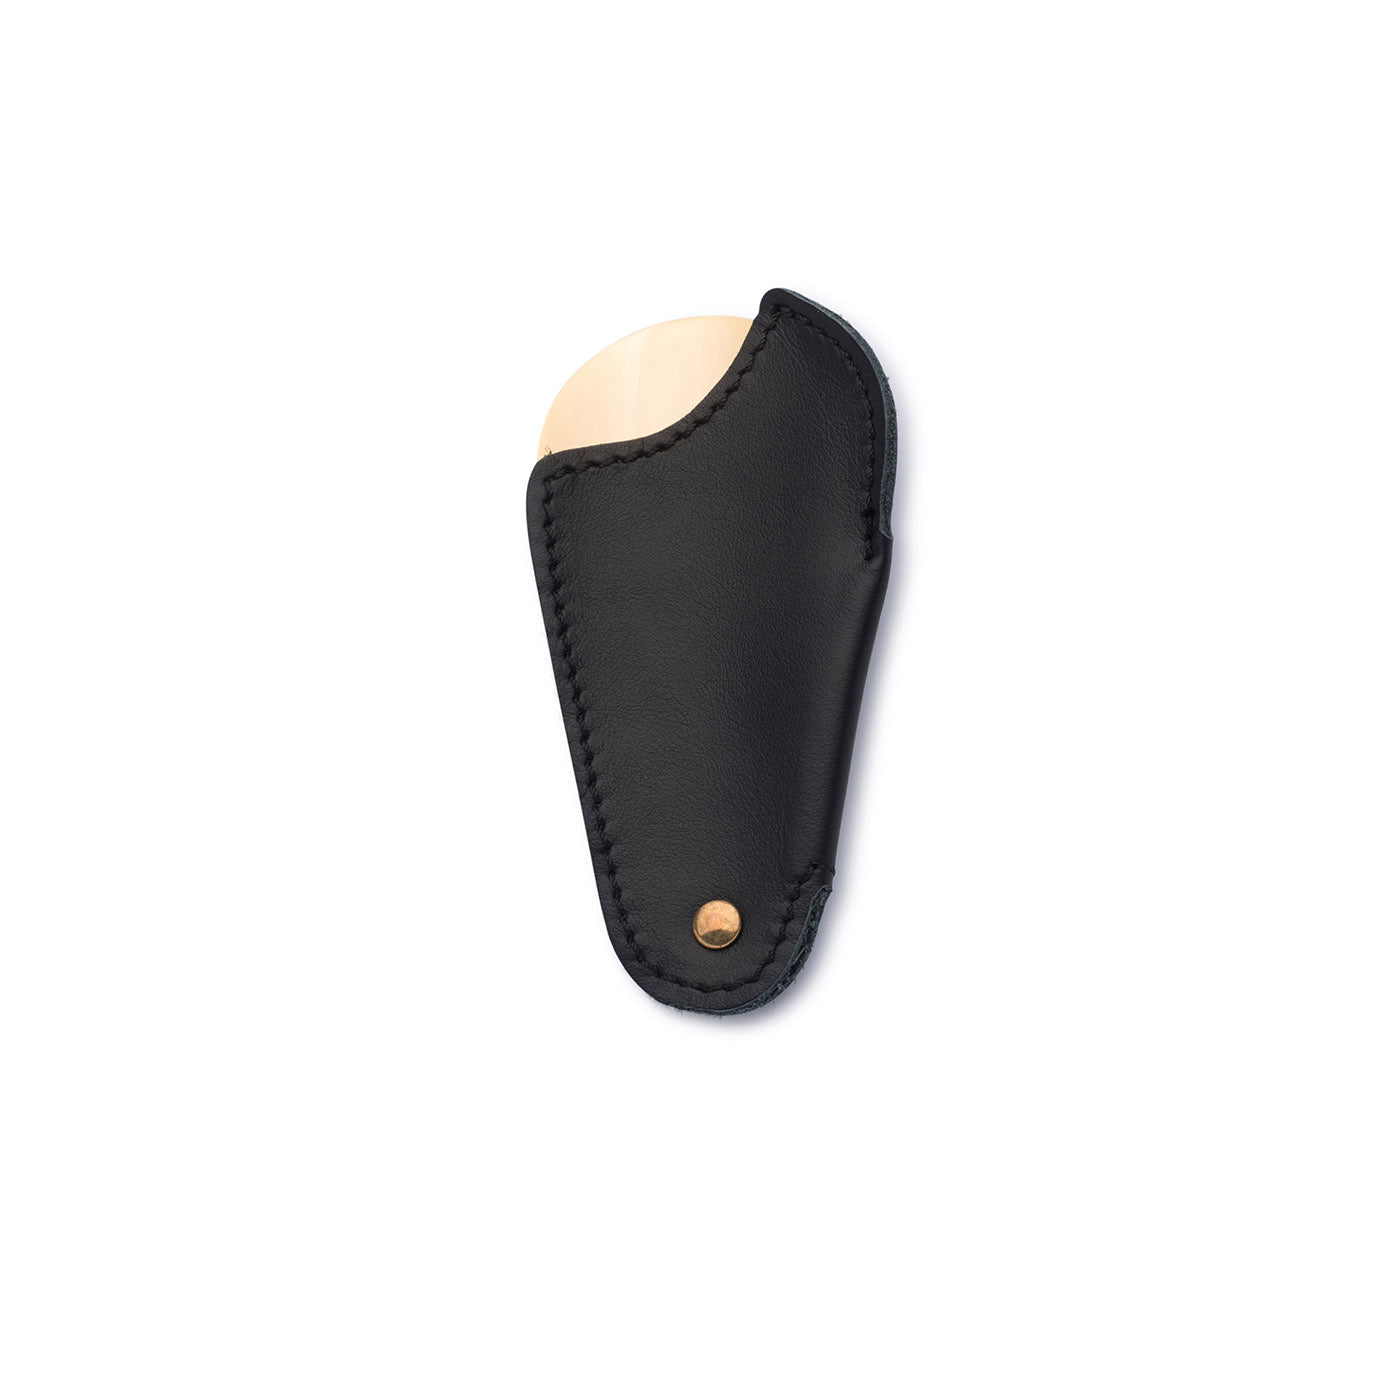 Black & Gold Leather Travel Shoe Horn - Alternative view 2